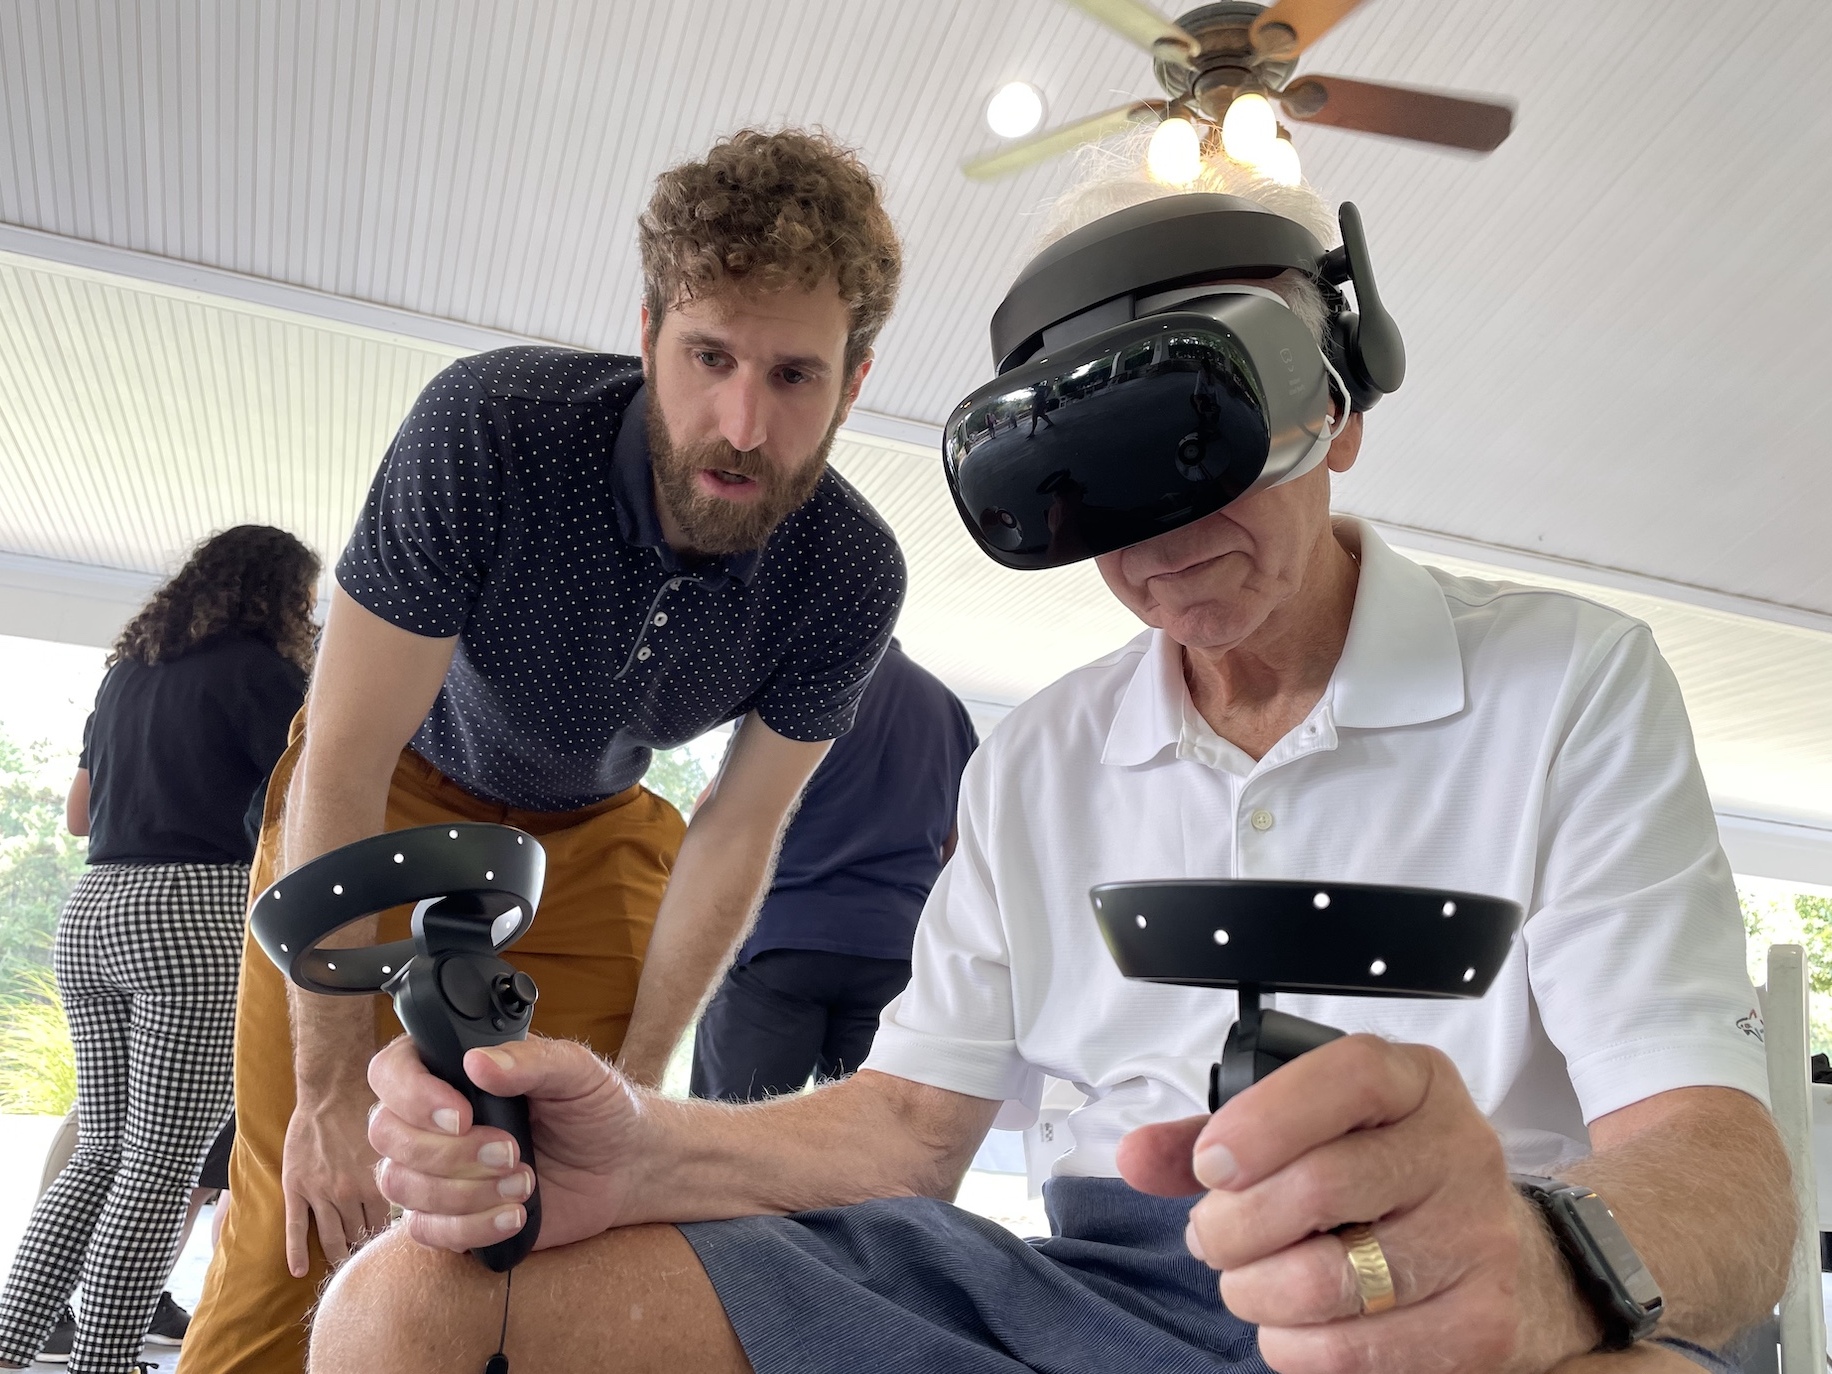 VCU researchers are using VR ‘games’ as exercise therapy for individuals with Parkinson’s